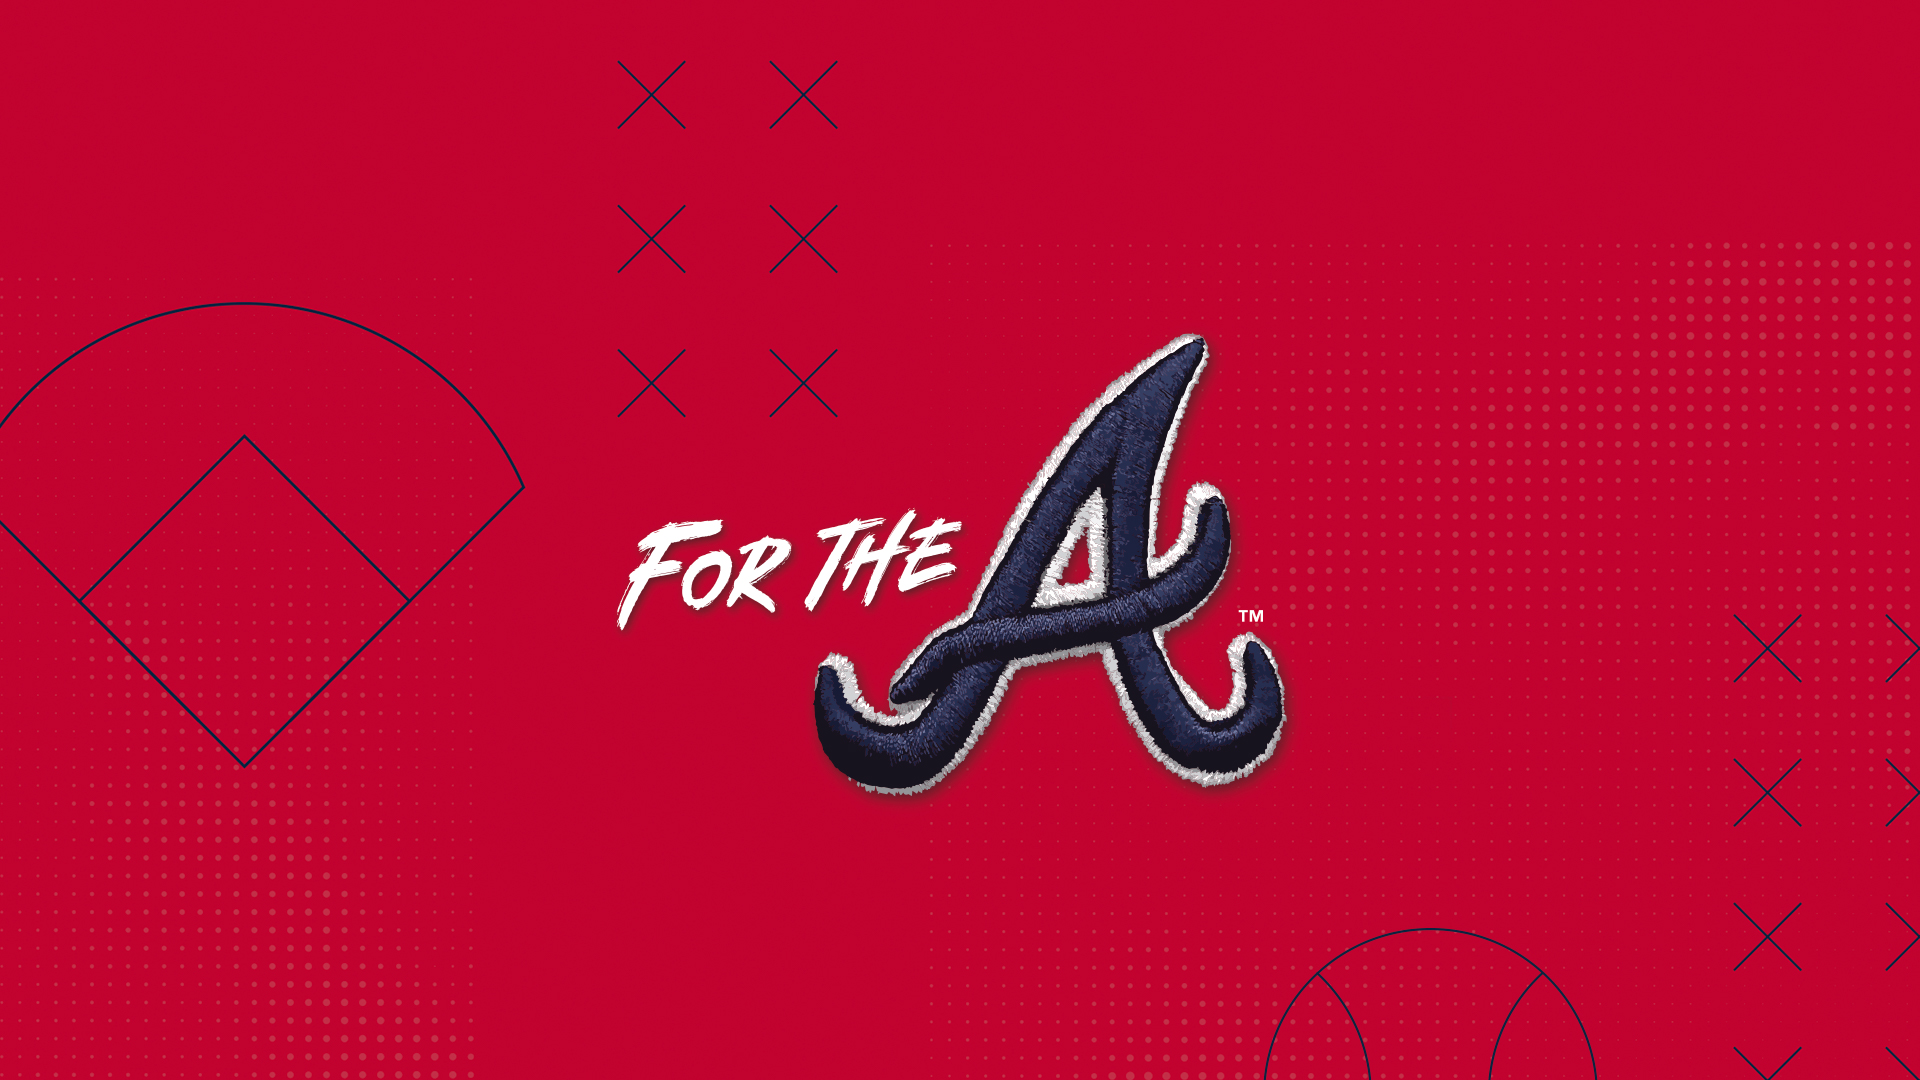 Braves World Series Champions Wallpapers - Wallpaper Cave